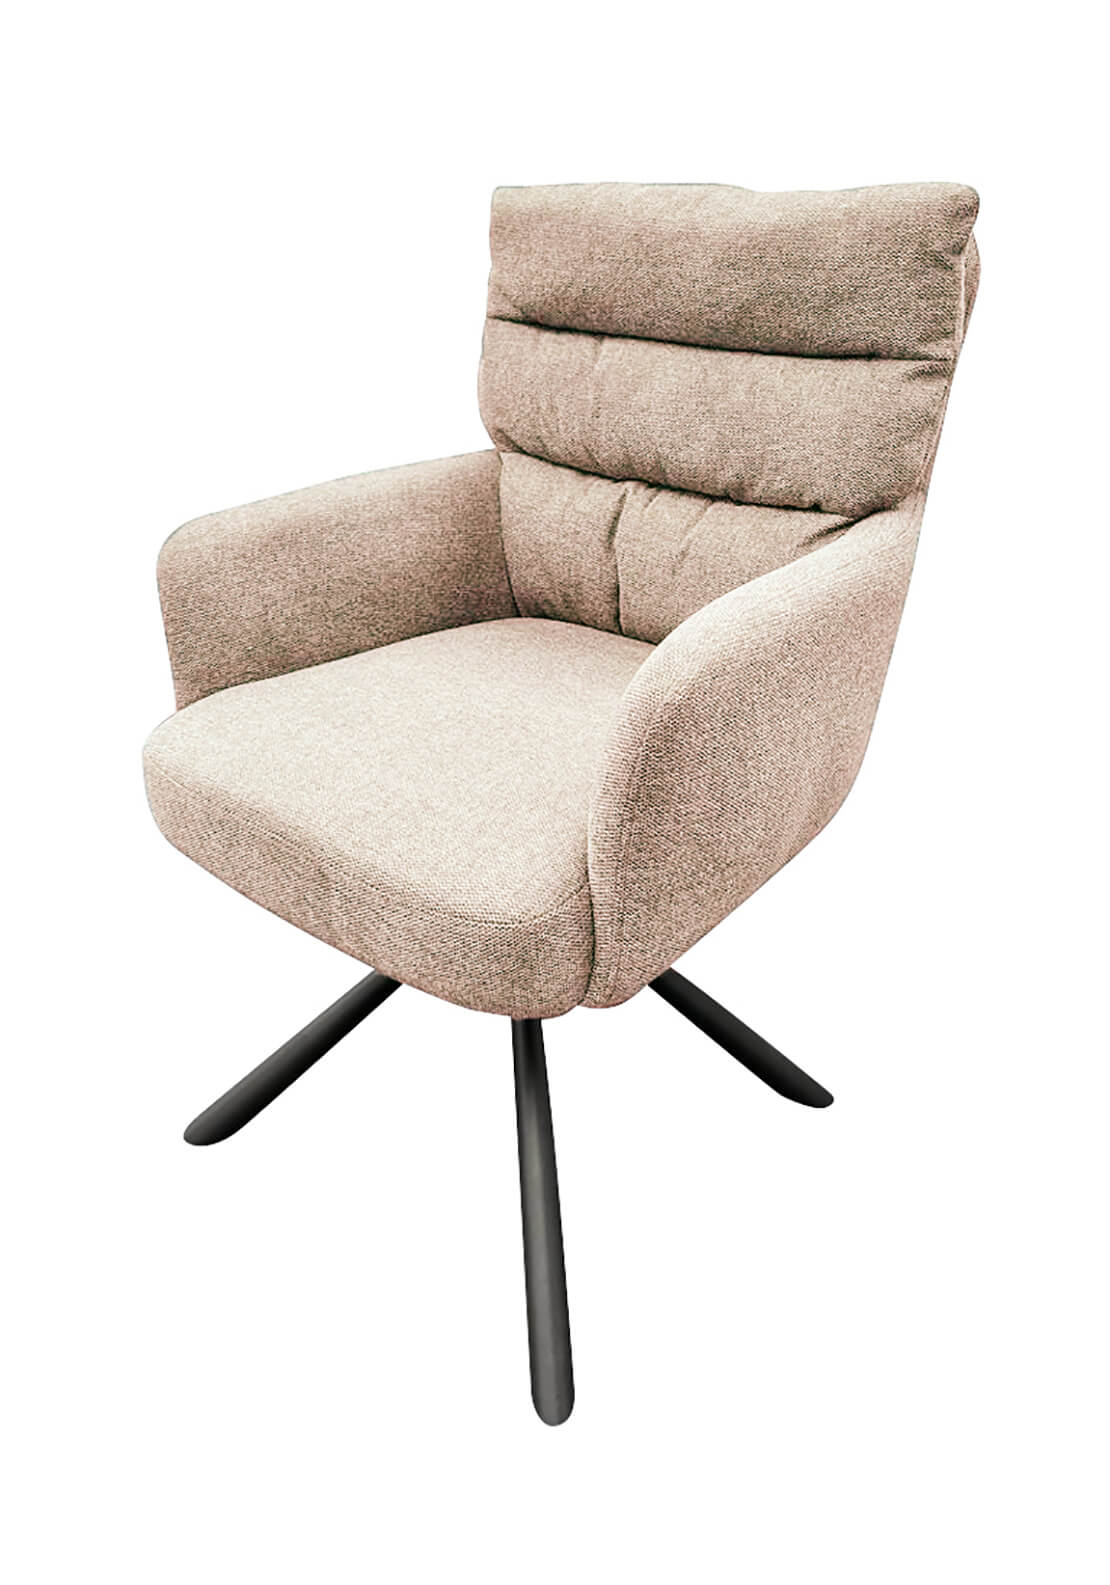 The Home Collection Stefan Swivel Dining Chair - Beige 2 Shaws Department Stores